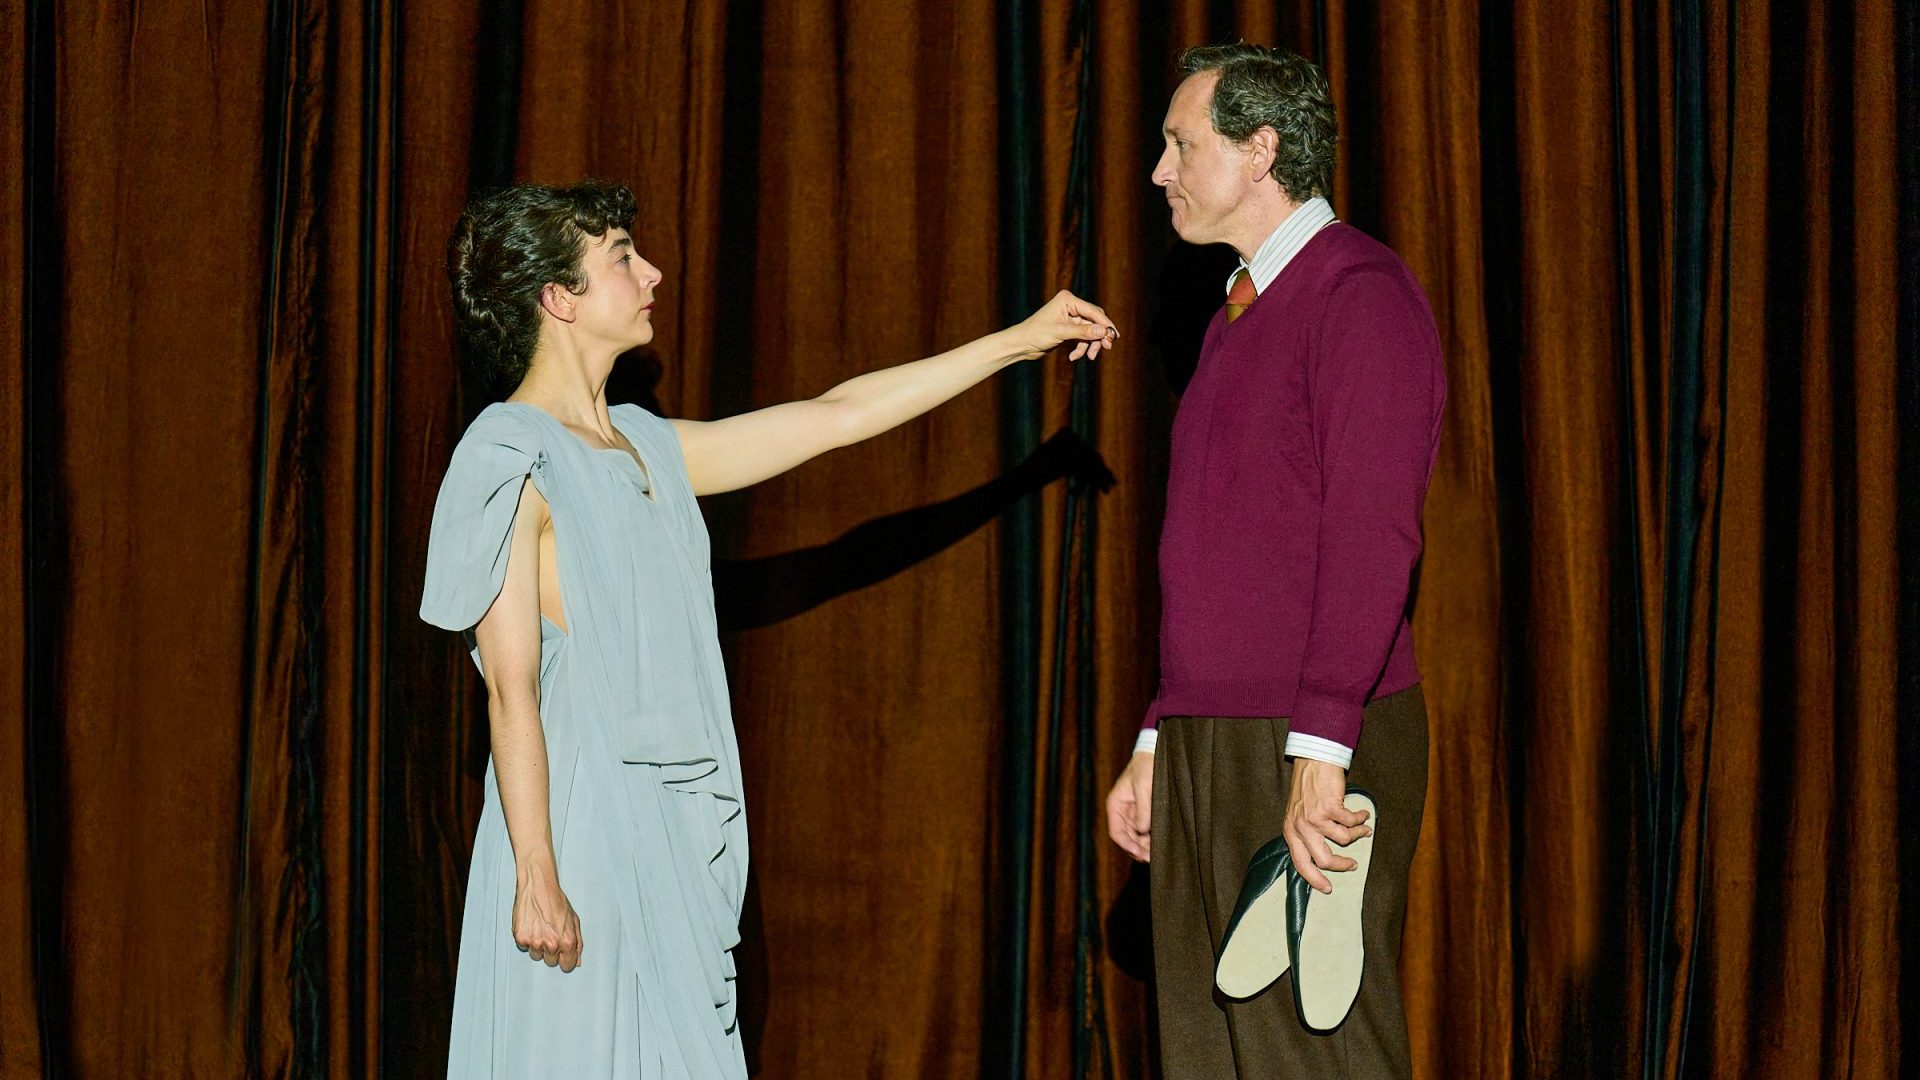 Patsy Ferran (Eliza Doolittle) and Bertie Carvel (Henry Higgins) in Pygmalion at The Old Vic. Pic: Manuel Harlan